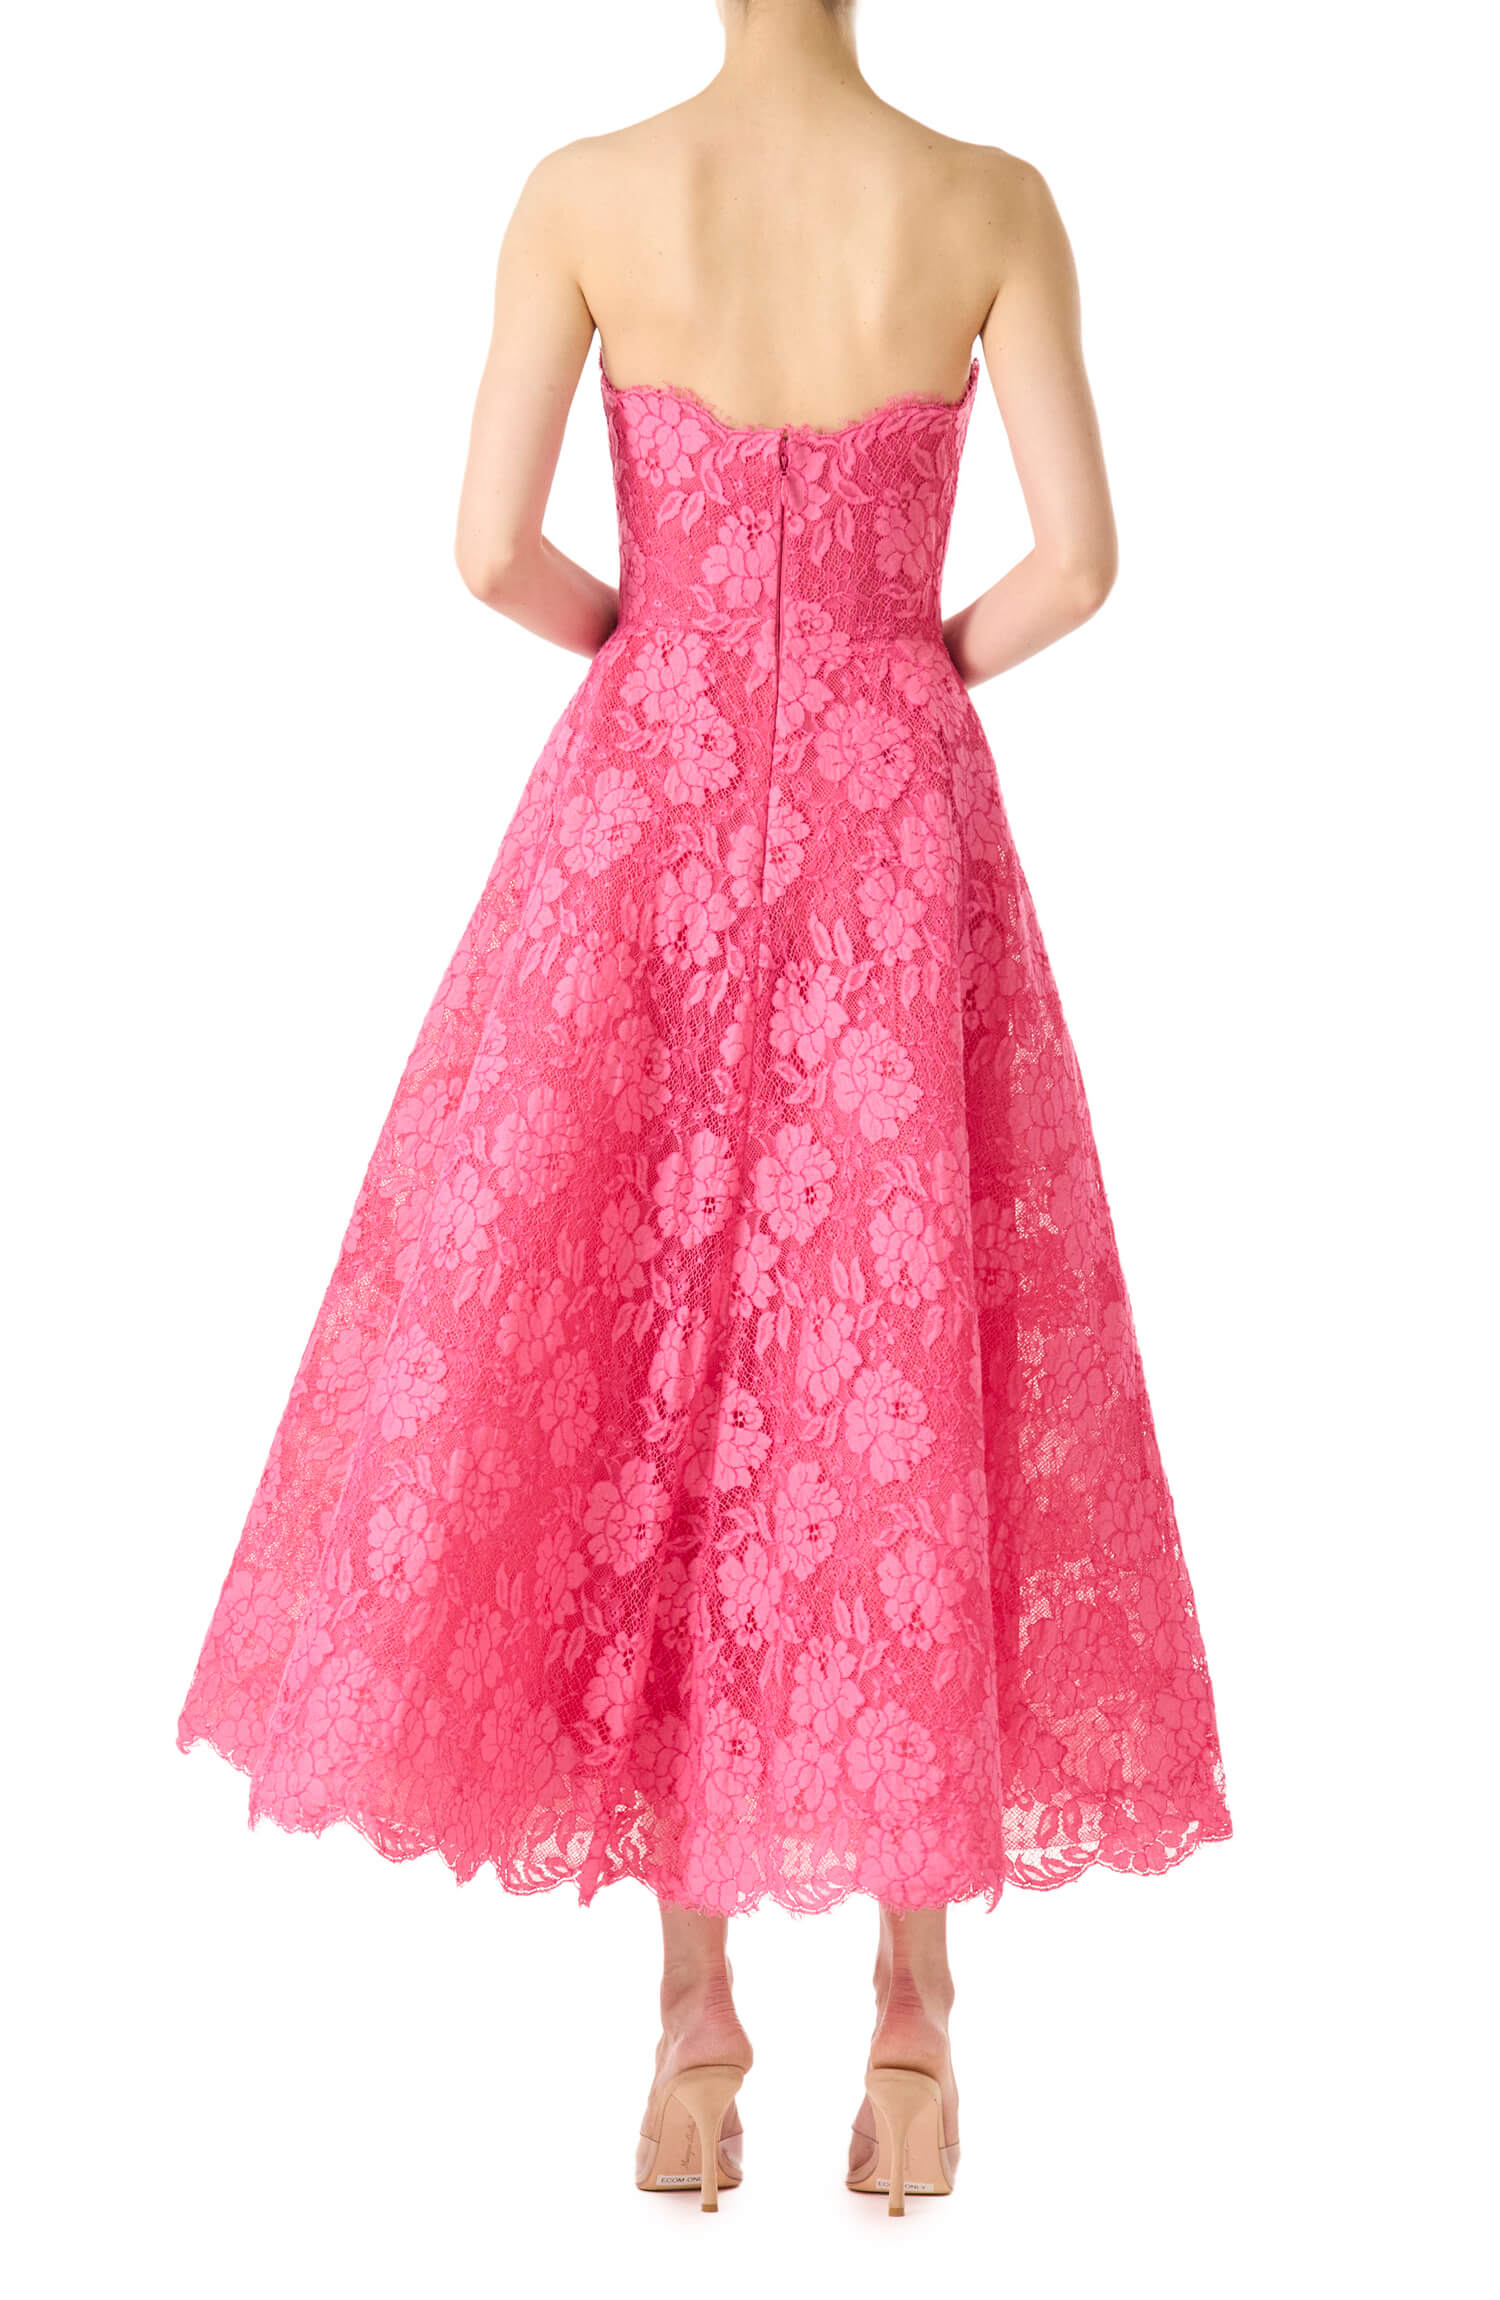 Monique Lhuillier strapless pink lace cocktail dress with full skirt.